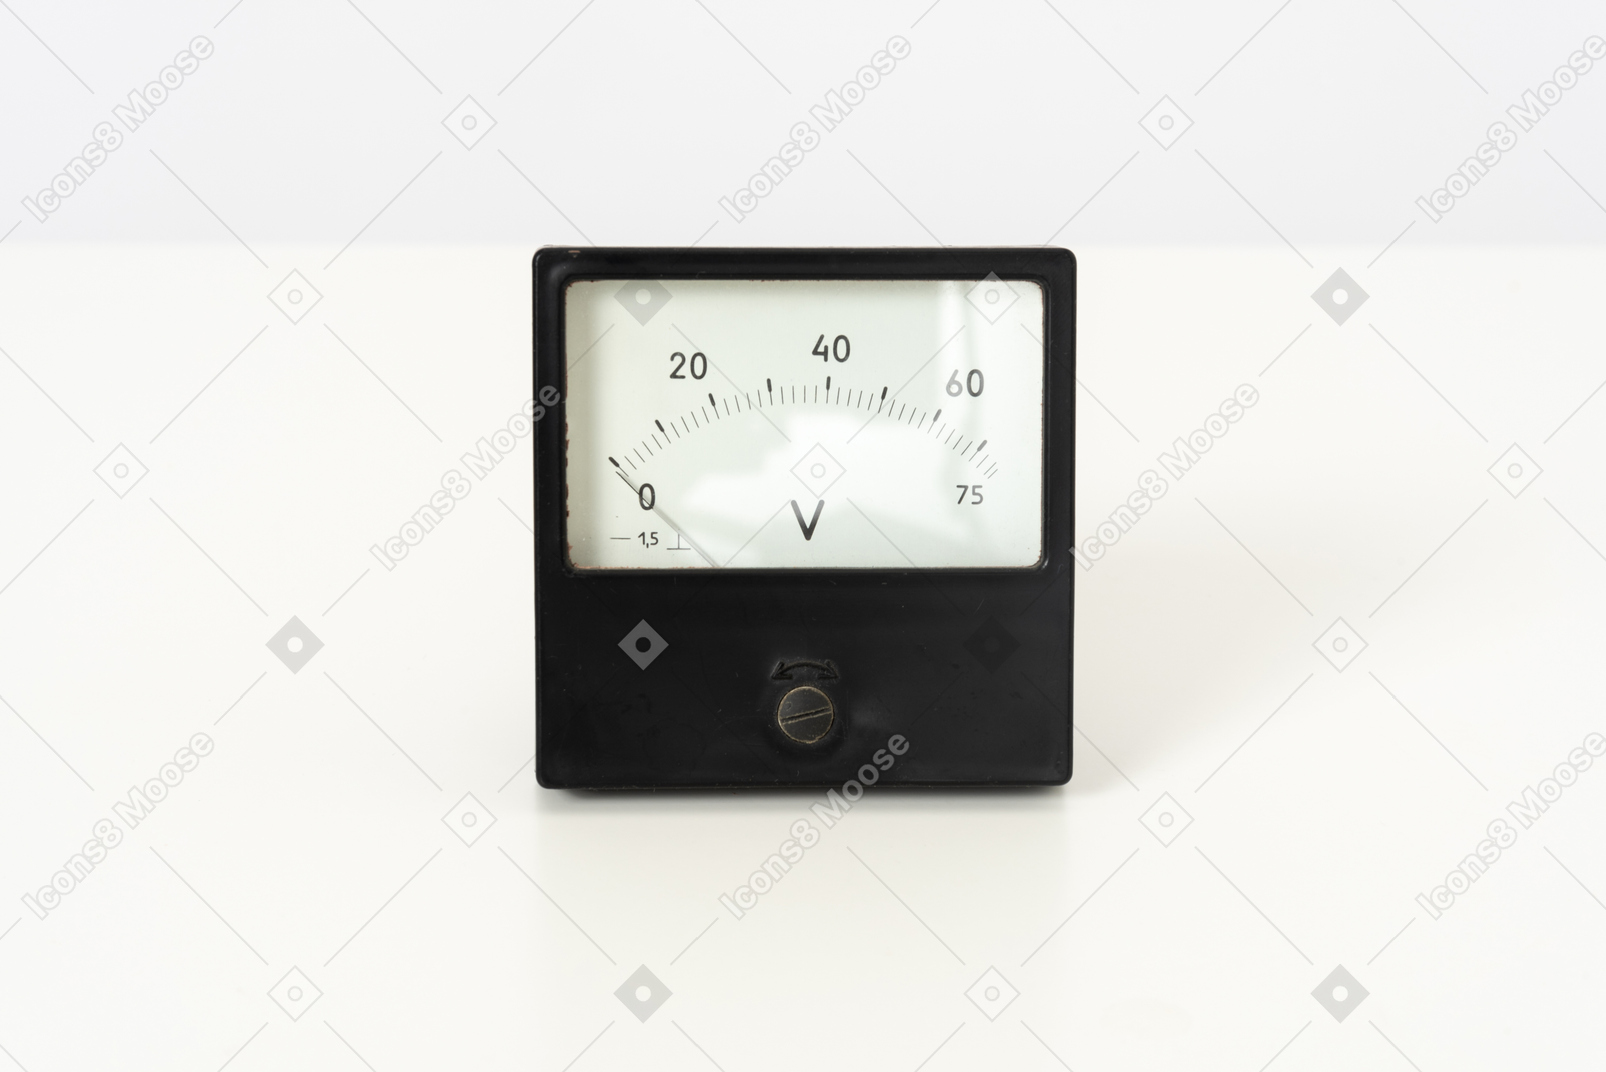 Voltmeter on a white background